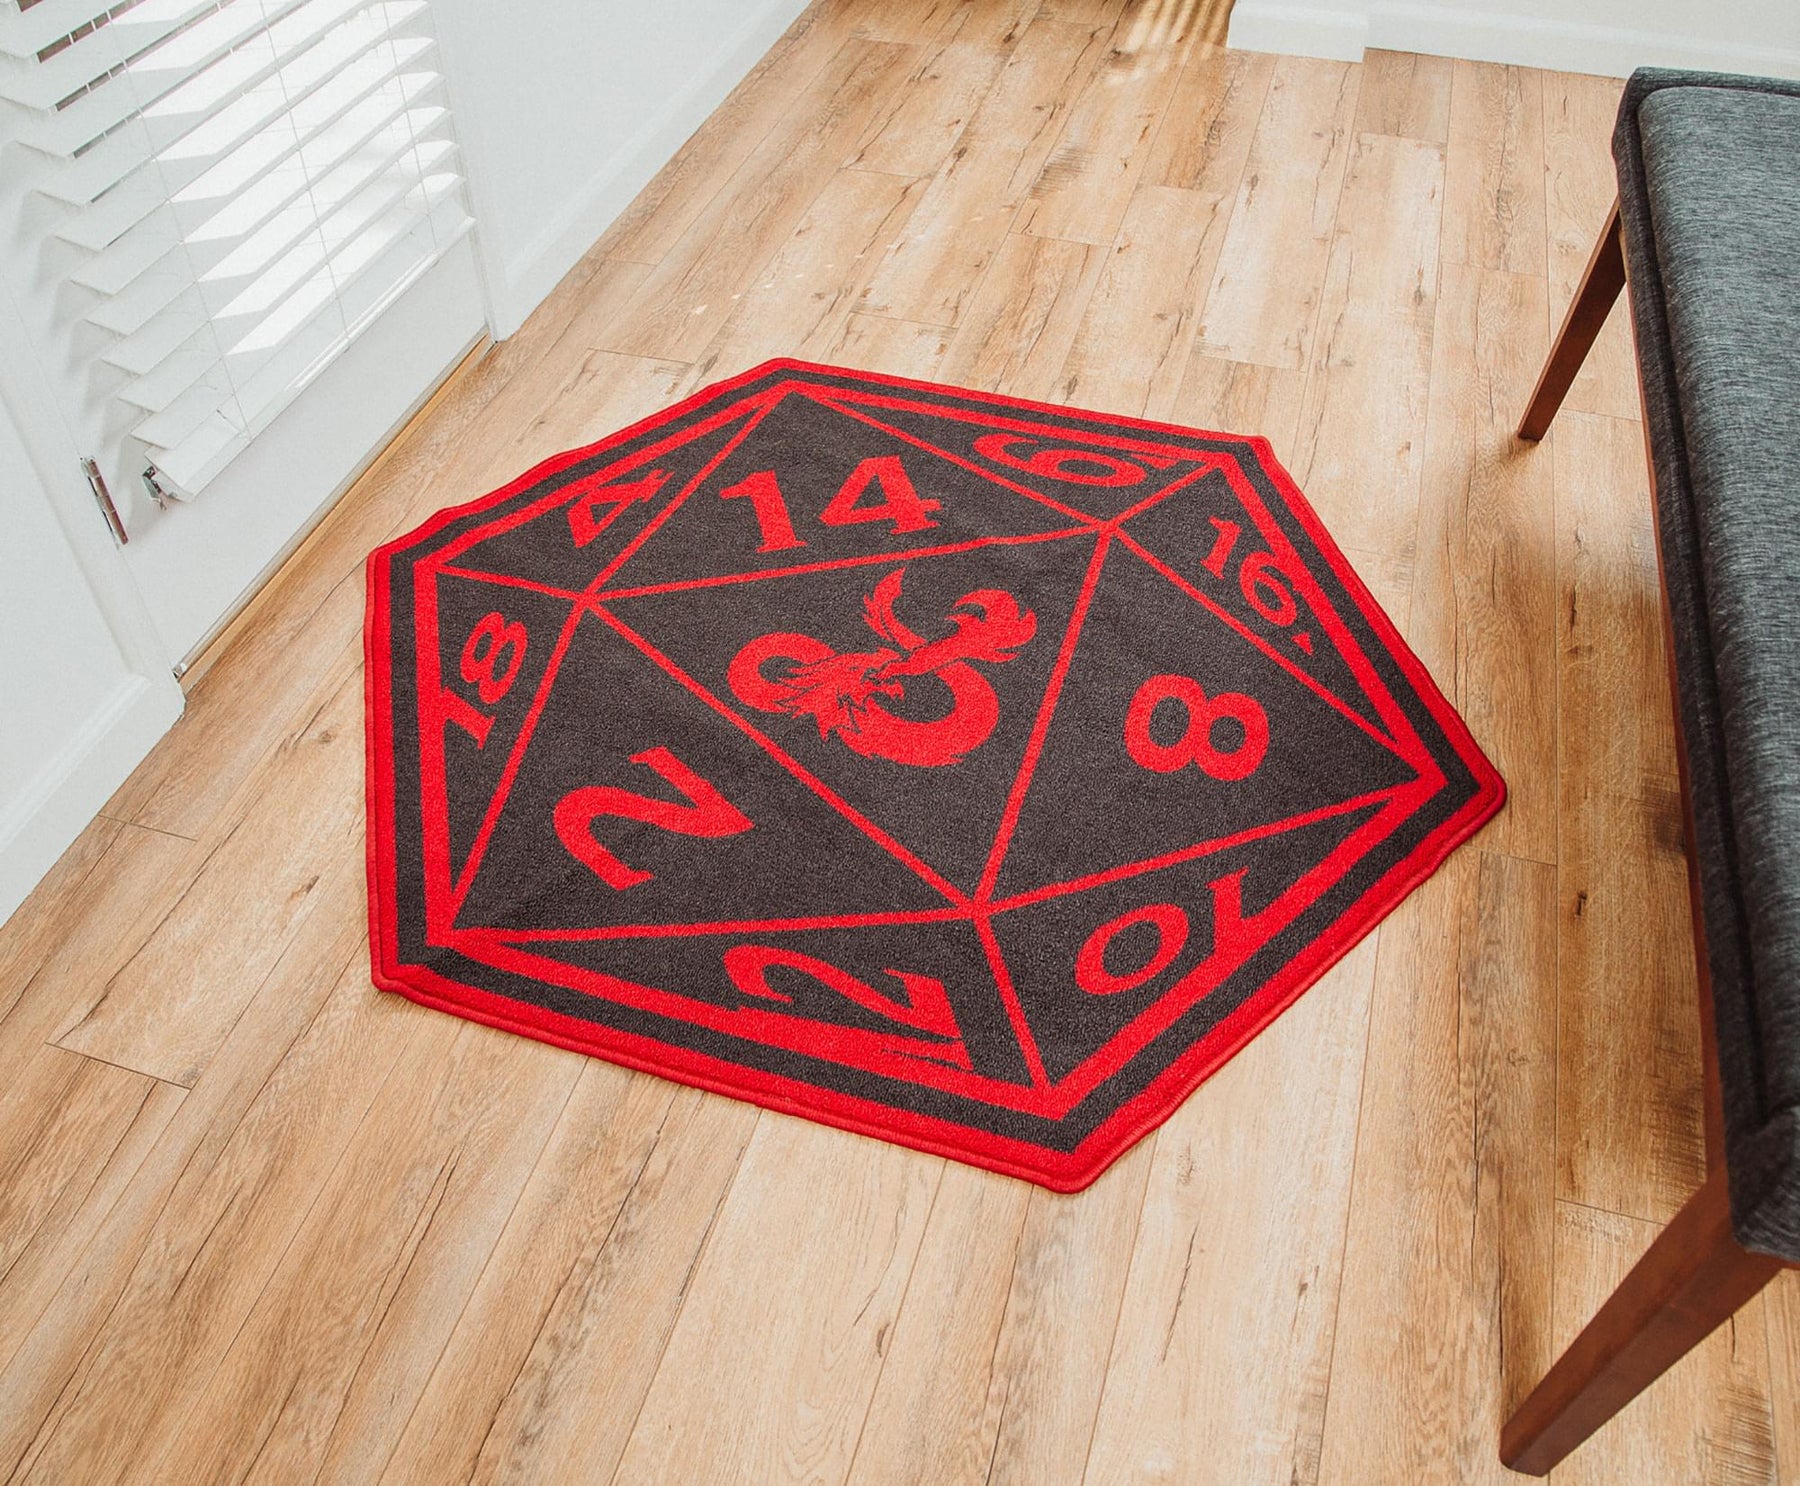 Dungeons & Dragons Red D20 Dice Printed Area Rug | 52 x 45 Inches